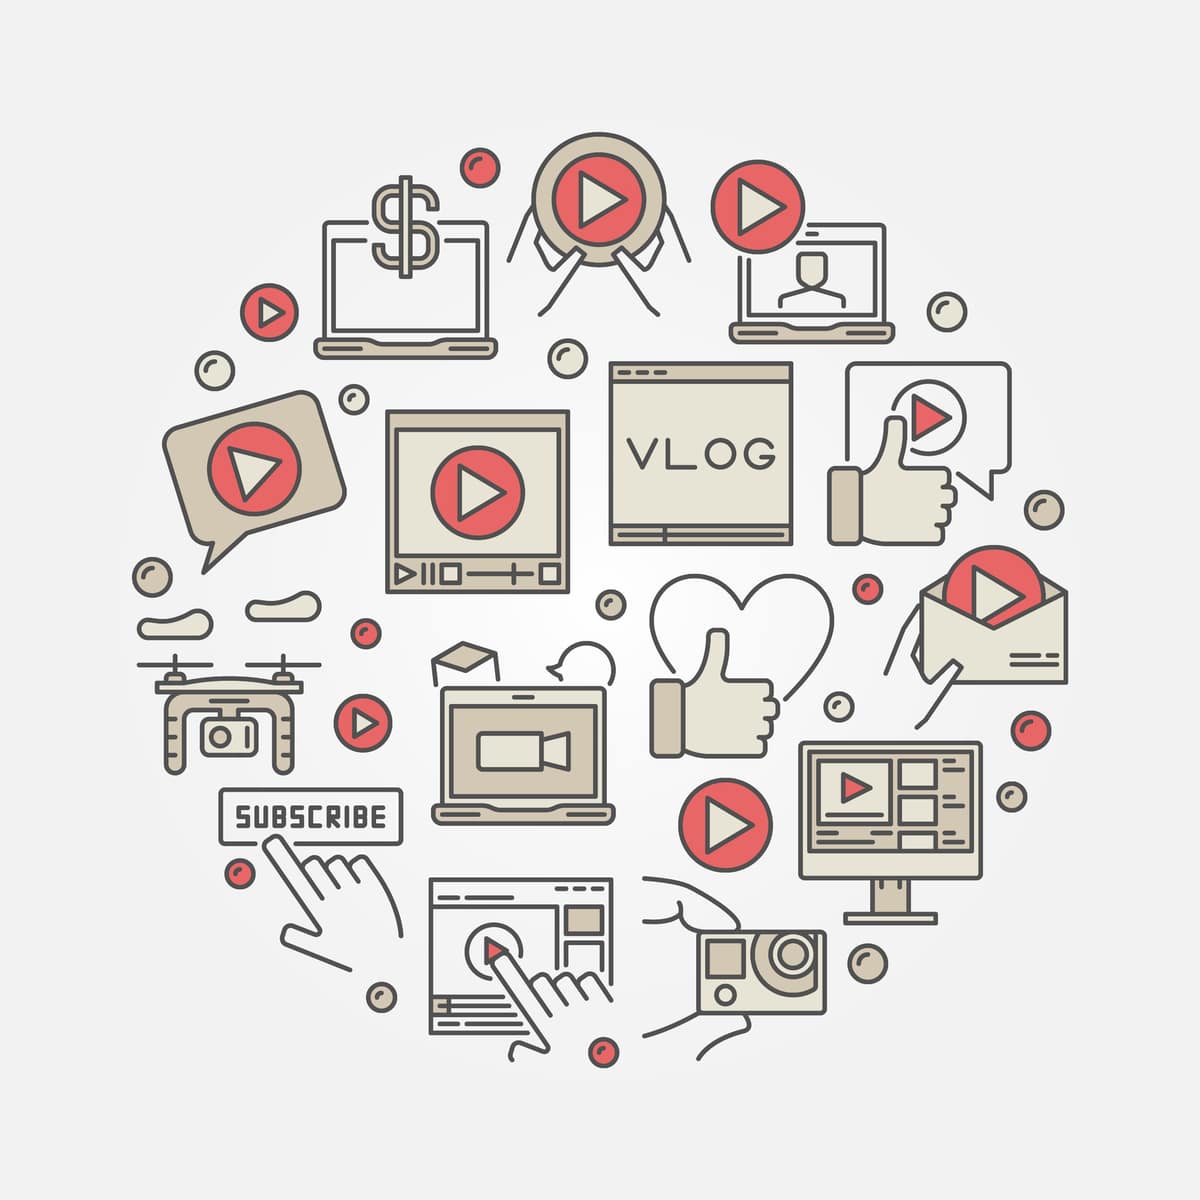 illustration icons of vlogs and video play buttons